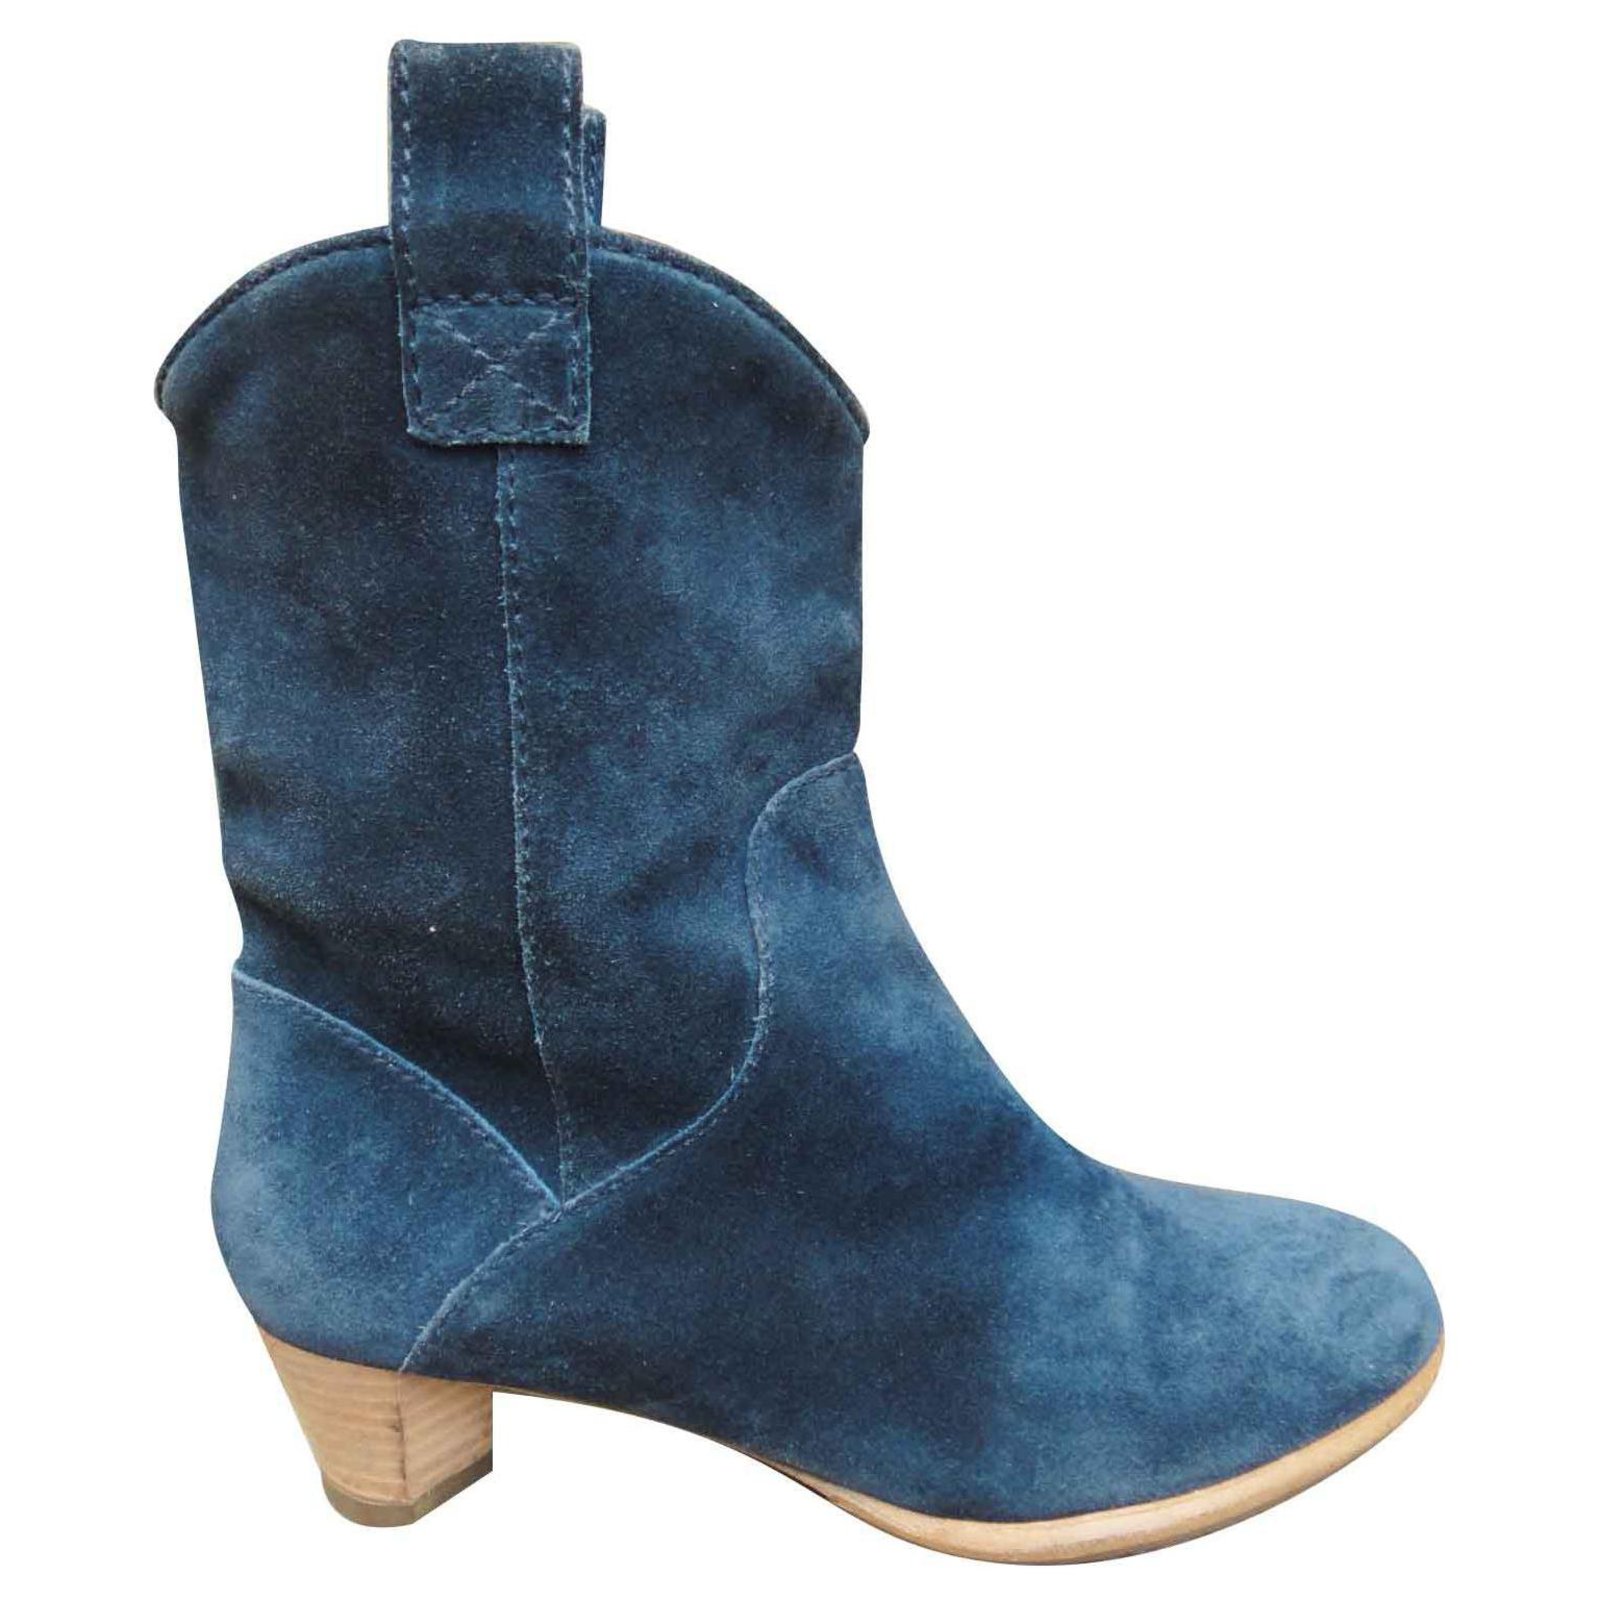 marc jacobs suede boots